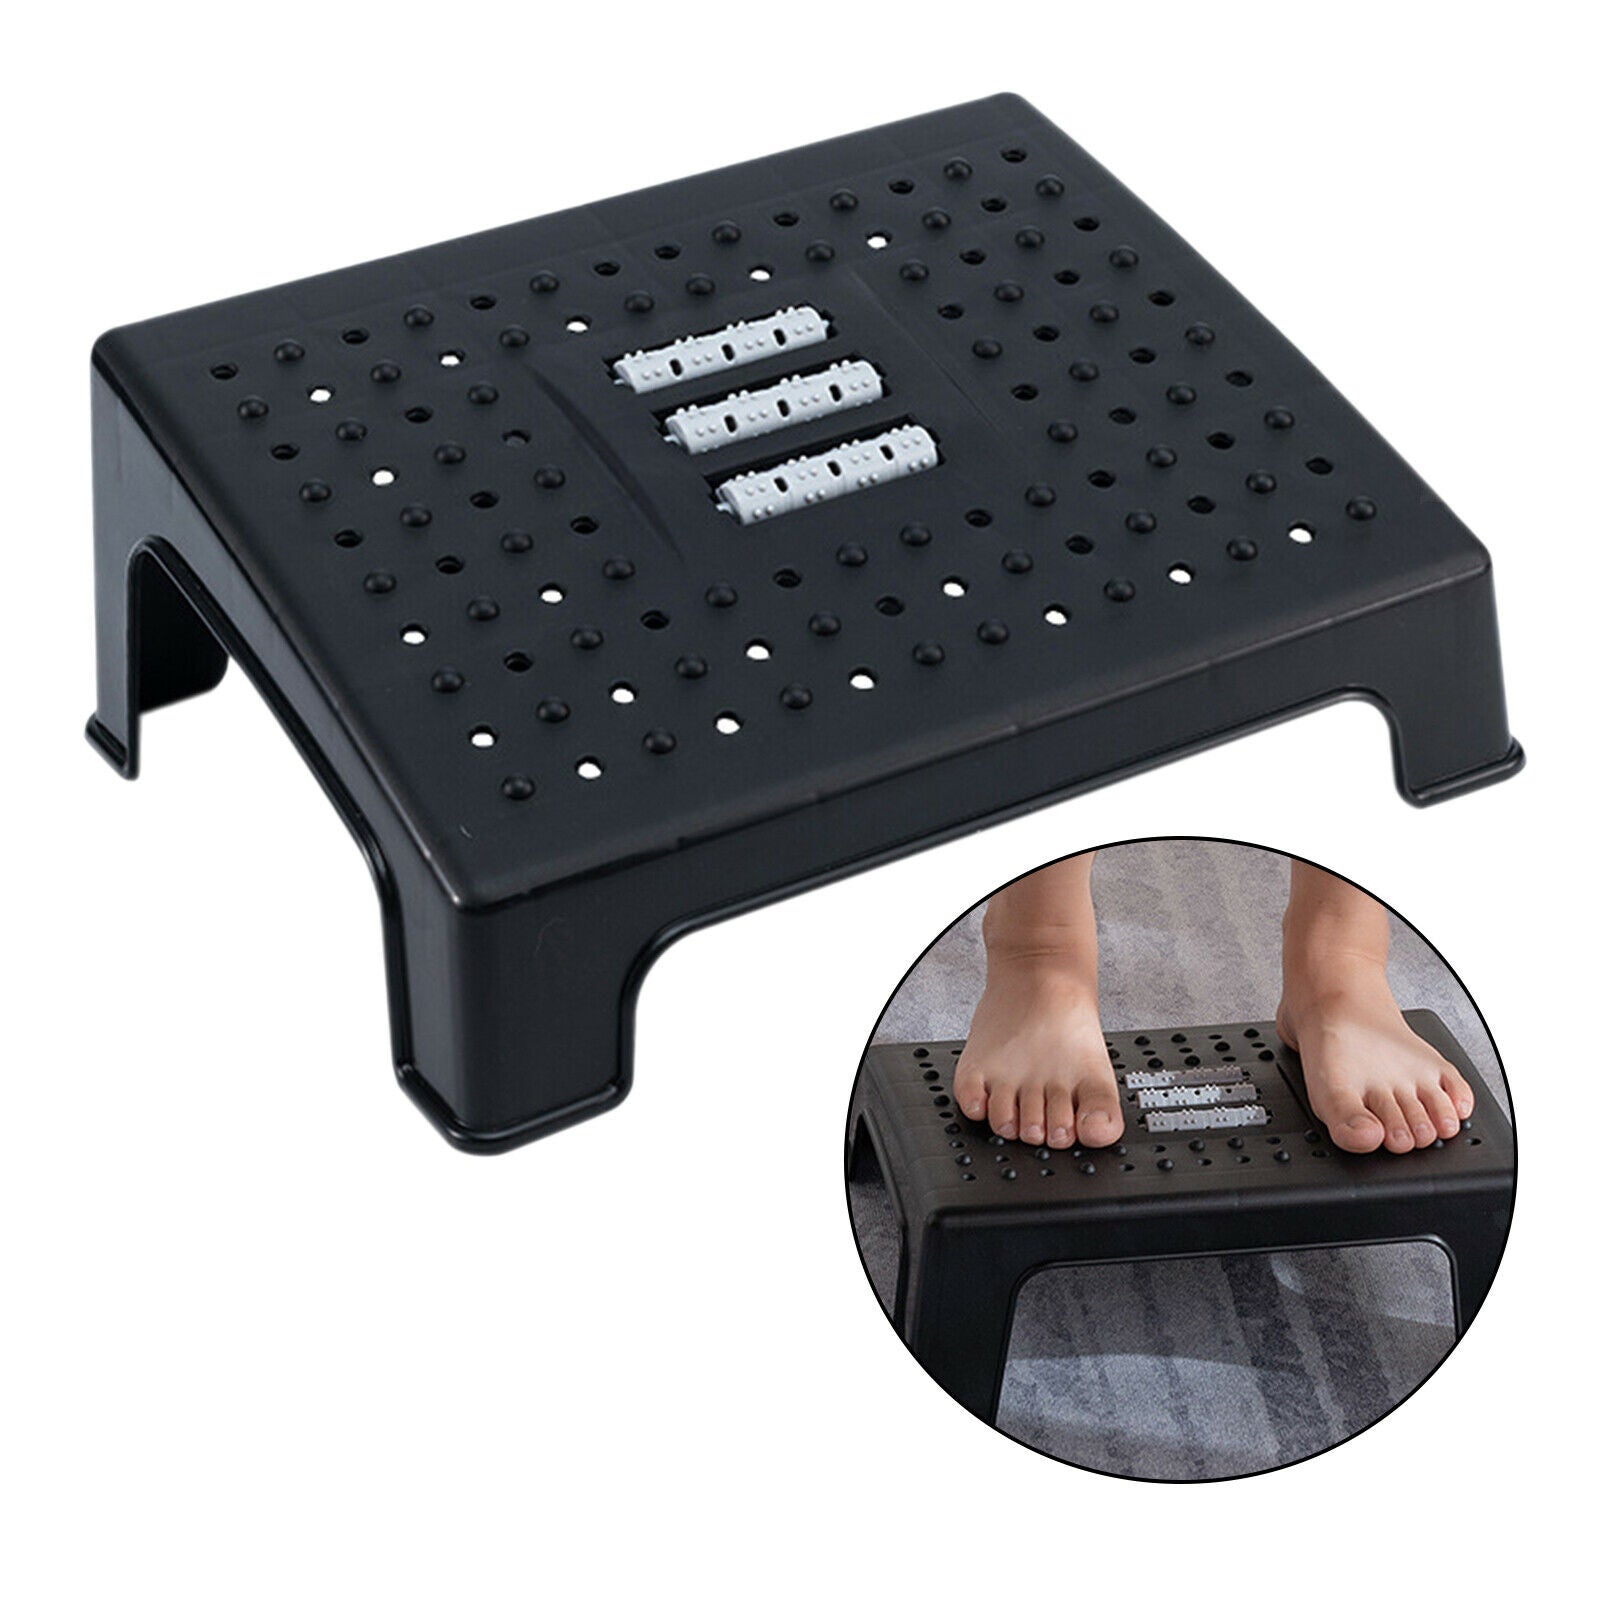 Under Desk Footrest with Massage Texture and Roller Foot Stool for Bathroom